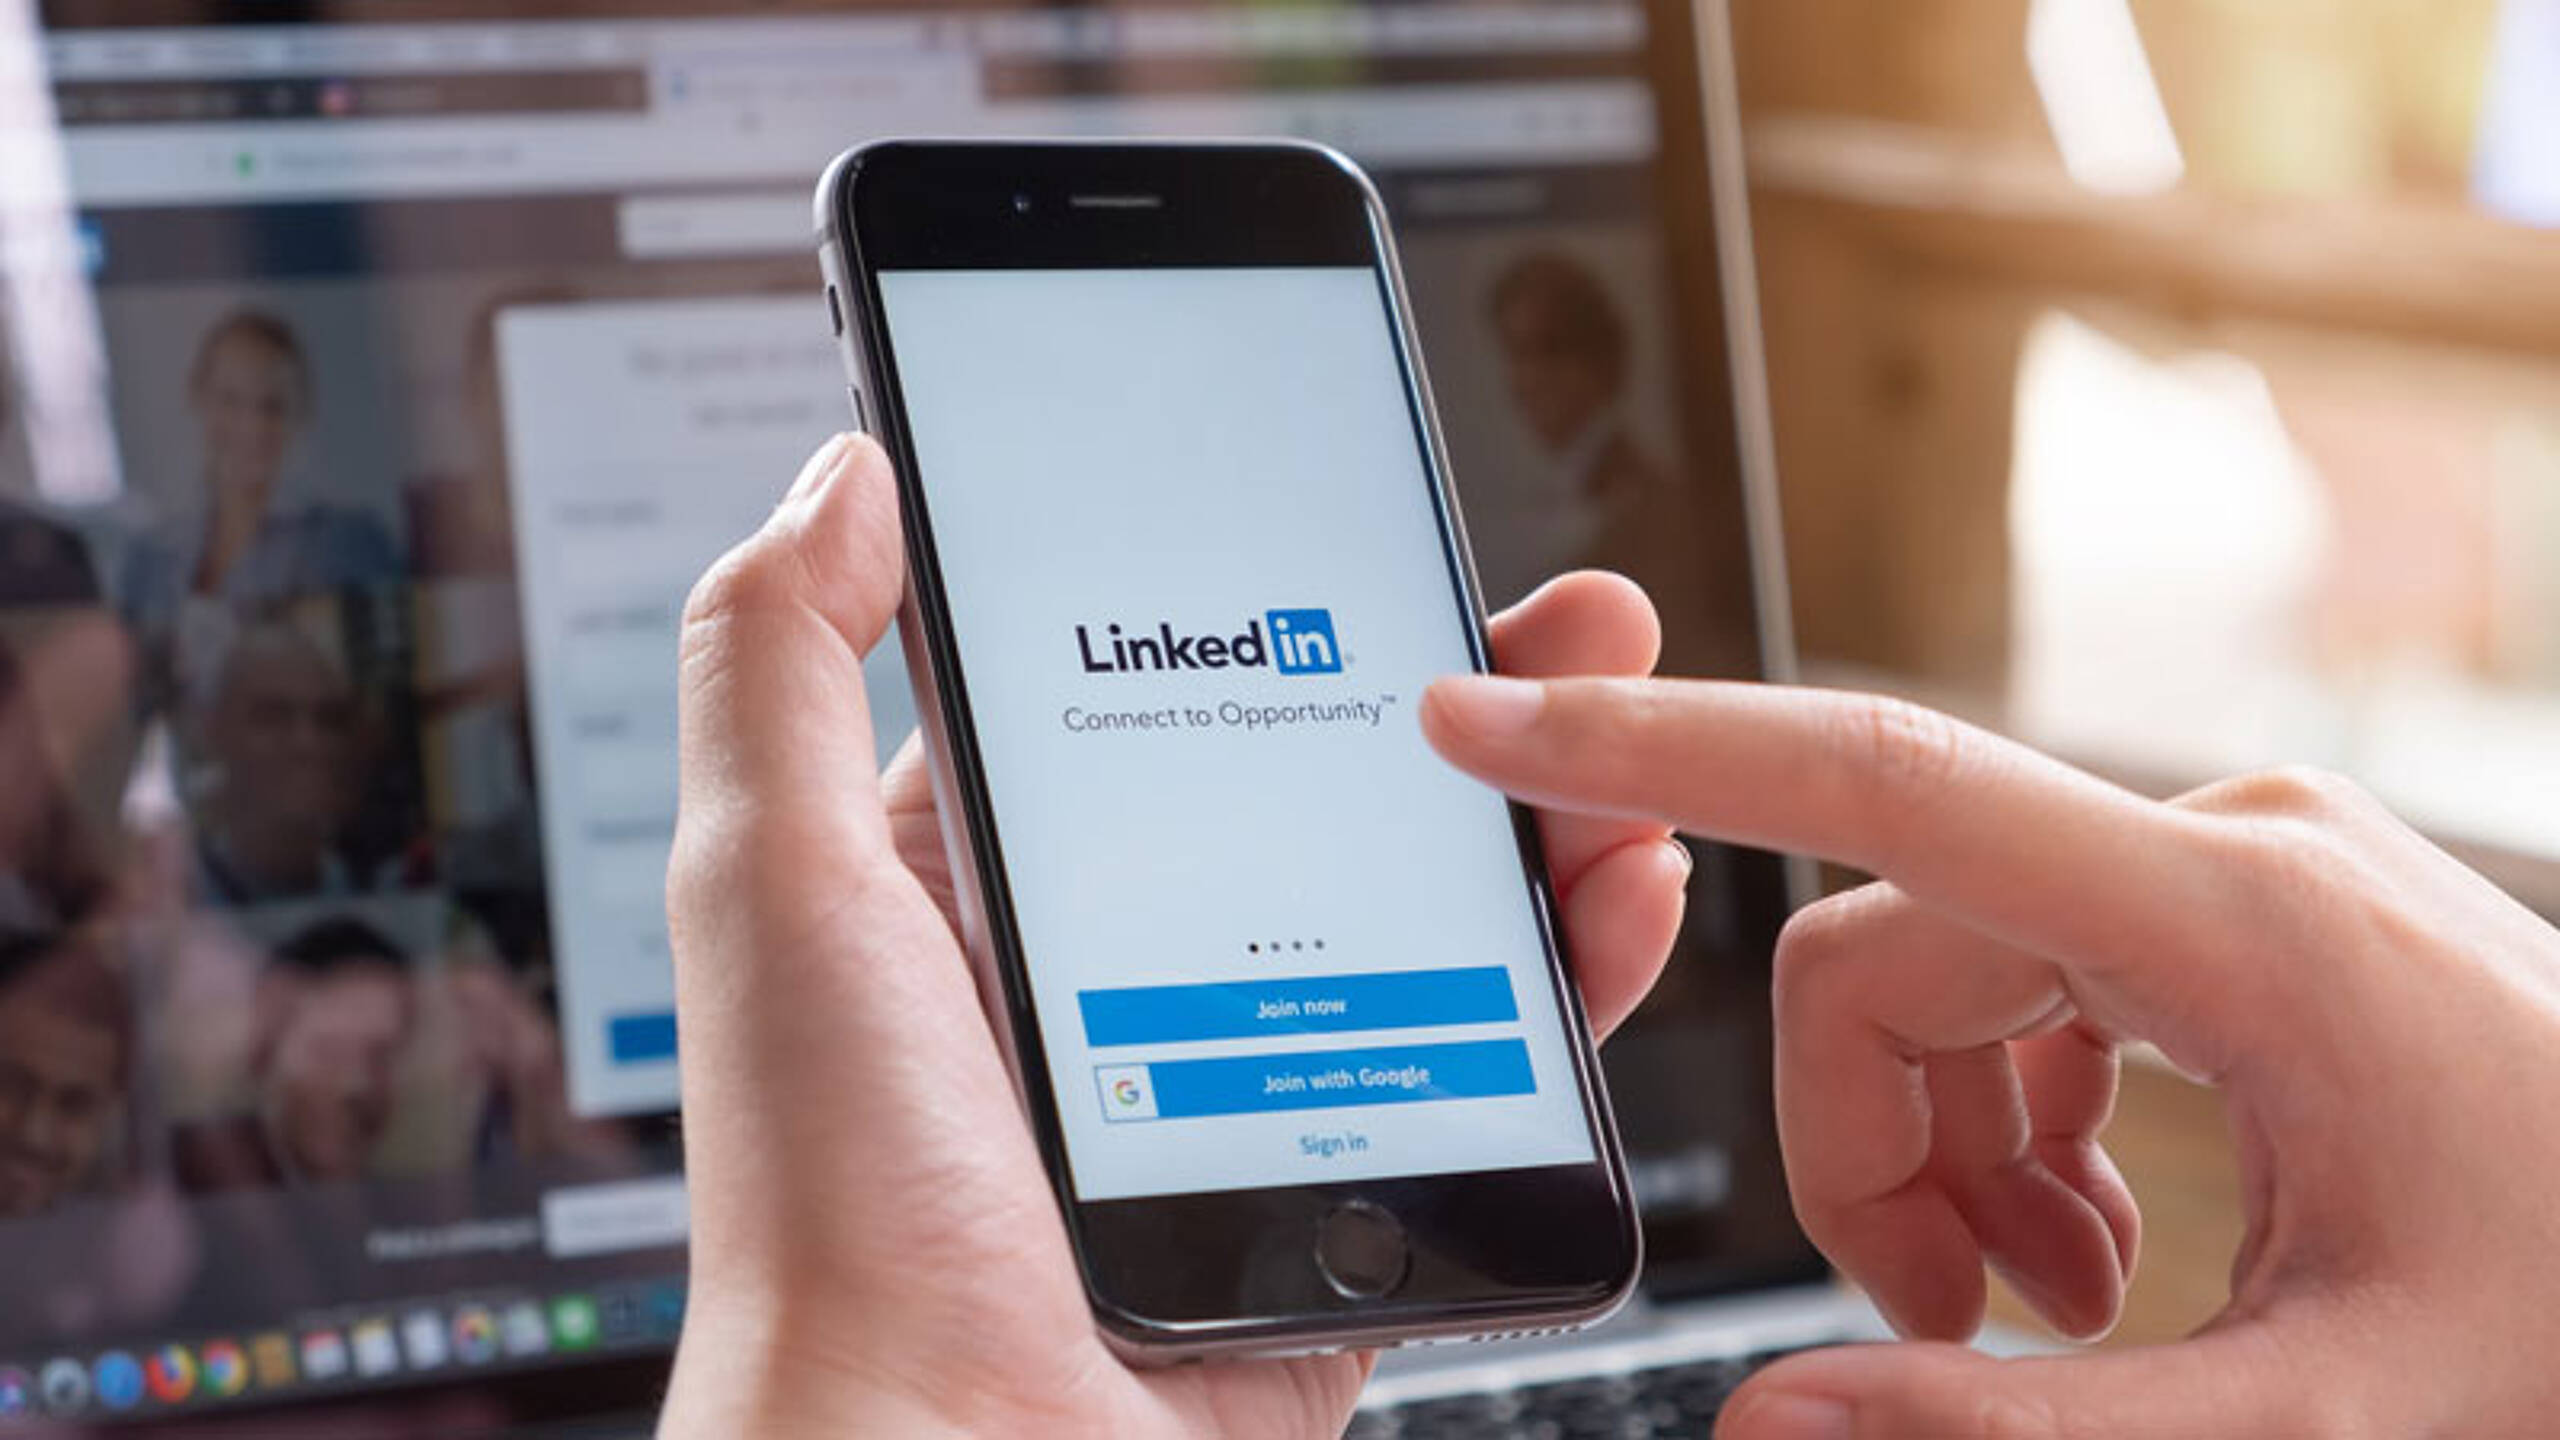 LinkedIn: Green jobs account for one in three UK role postings, but skills shortages loom